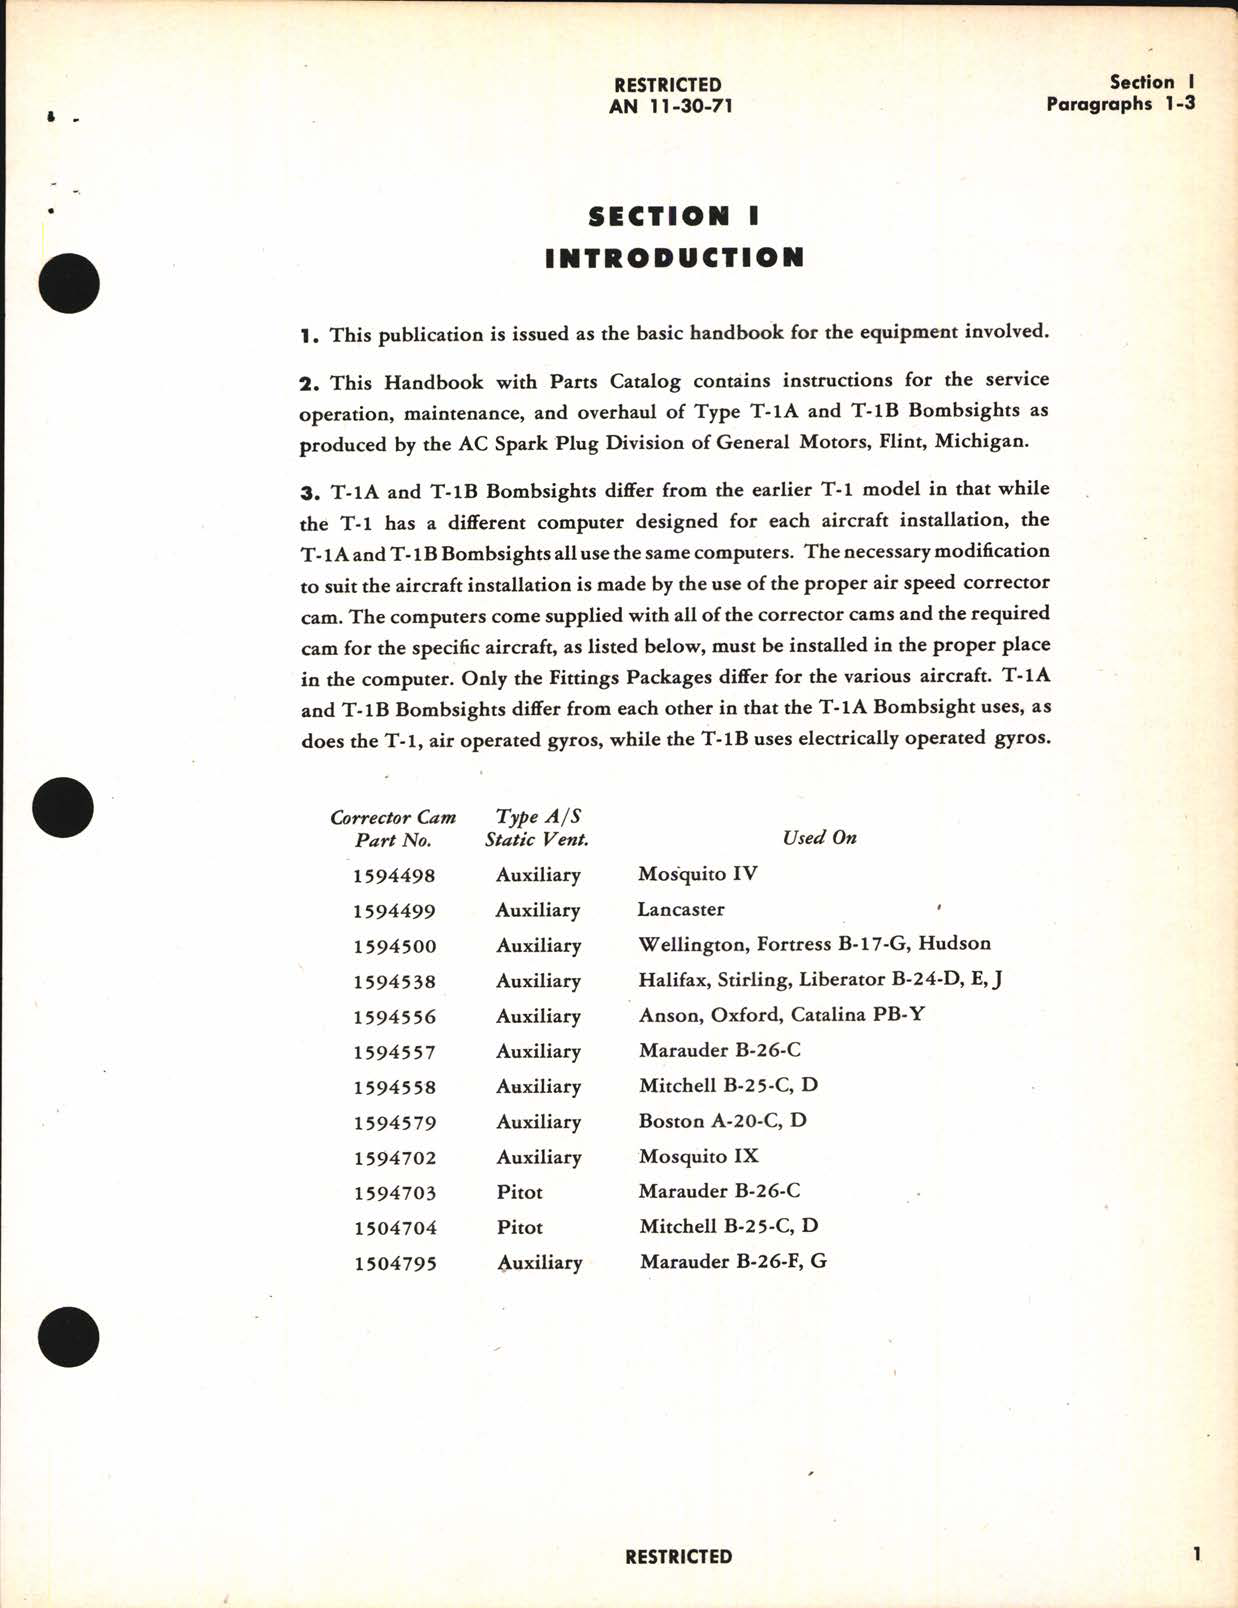 Sample page 5 from AirCorps Library document: Handbook of Instructions with Parts Catalog for Bombsights Types T-1A and T-1B